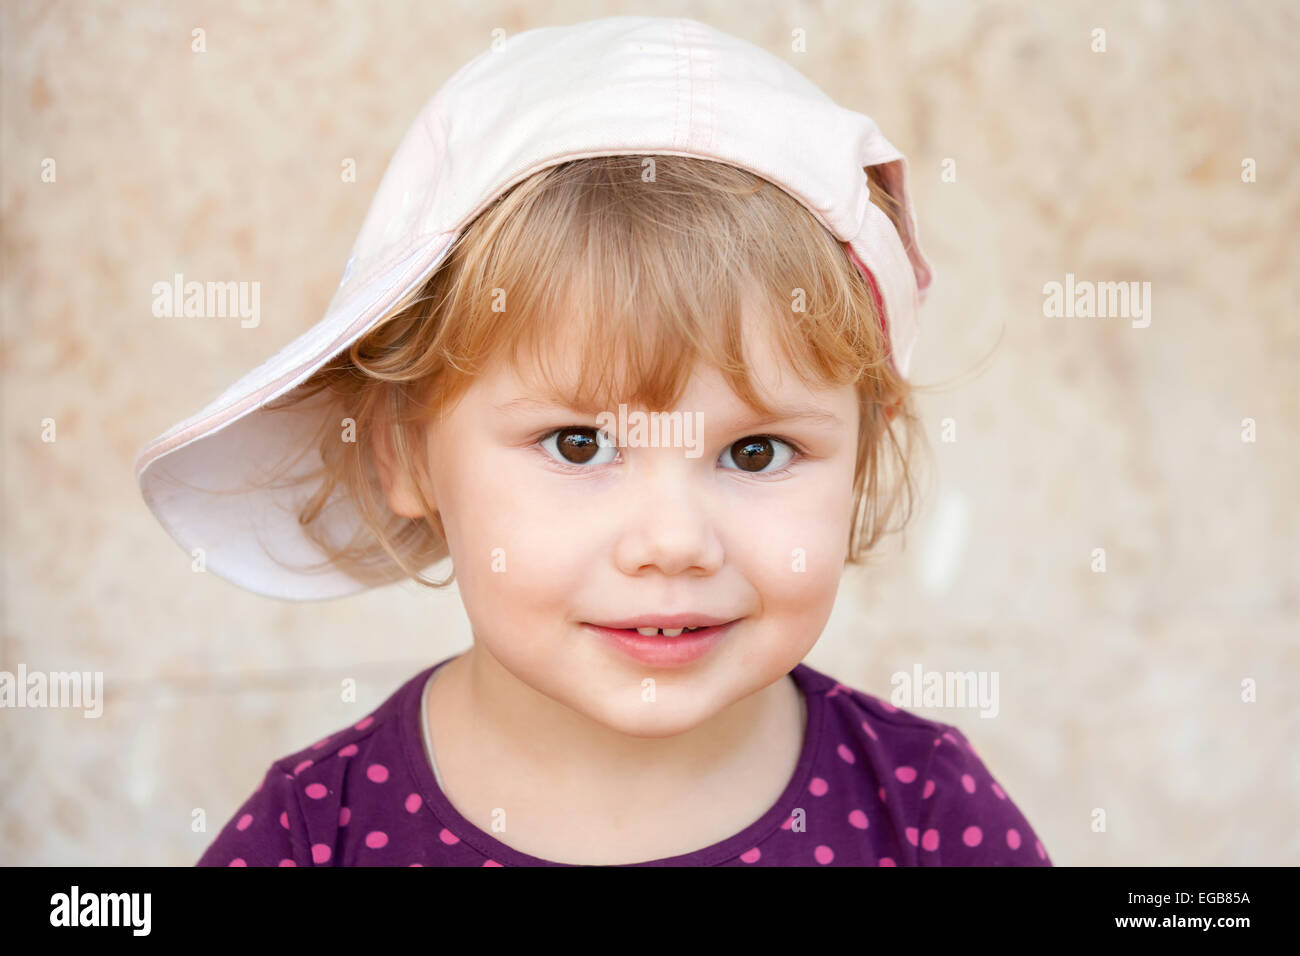 Outdoor closeup portrait of smiling cute Caucasian blond baby girl in white baseball cap Stock Photo